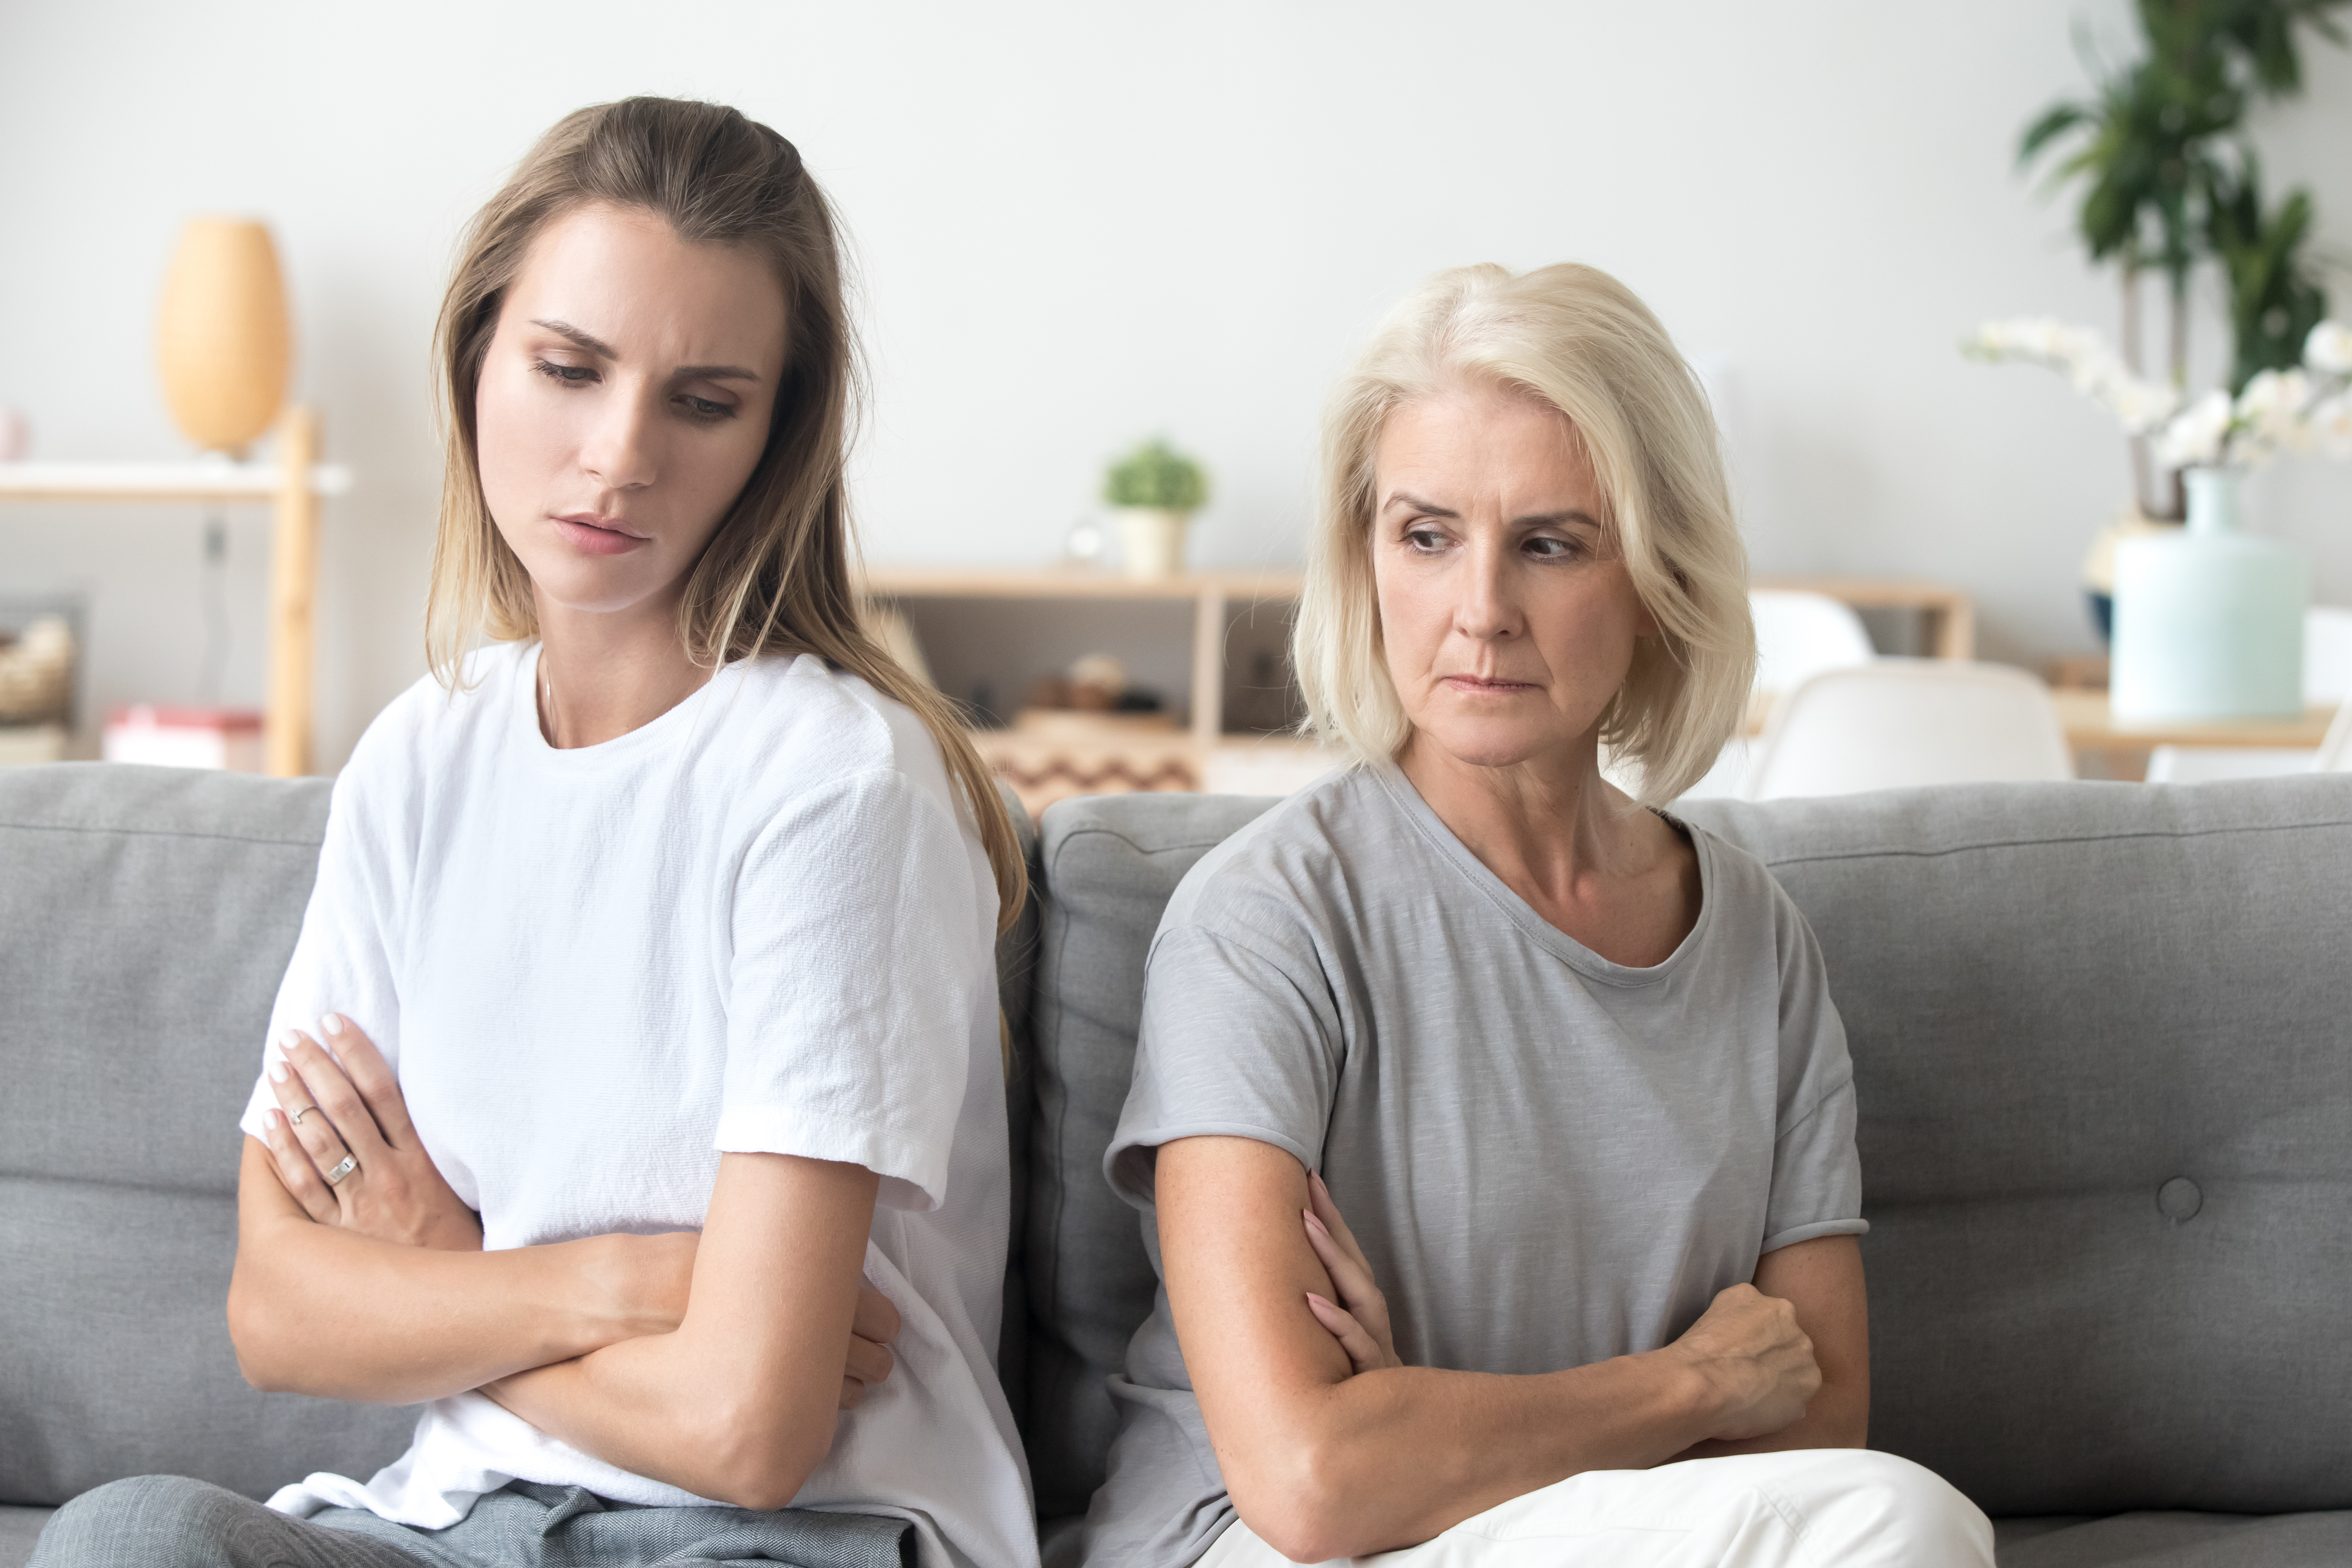 A younger woman suspicious of an older woman, both seated with their backs turned to each other | Source: Shutterstock